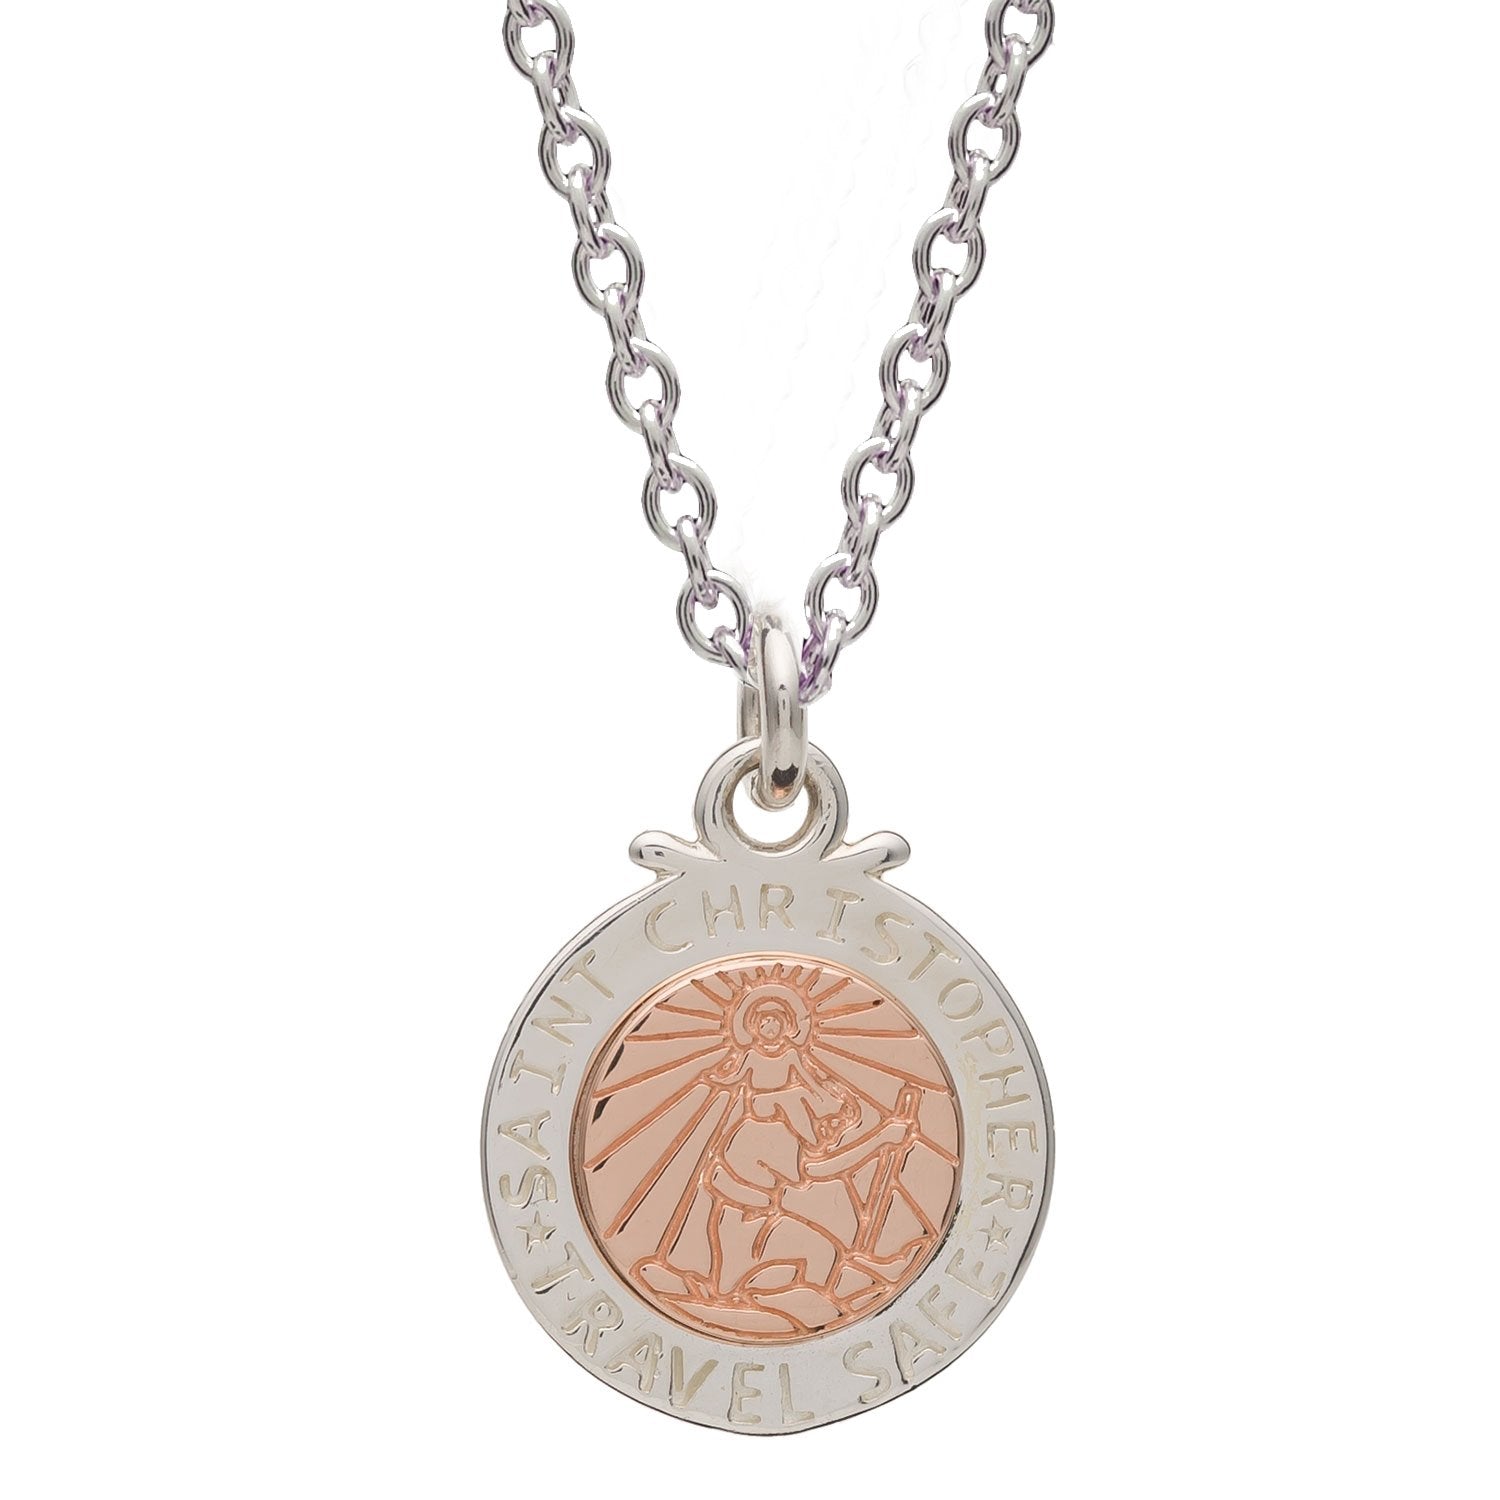 Personalised St Christopher Necklace - Silver & Rose Gold